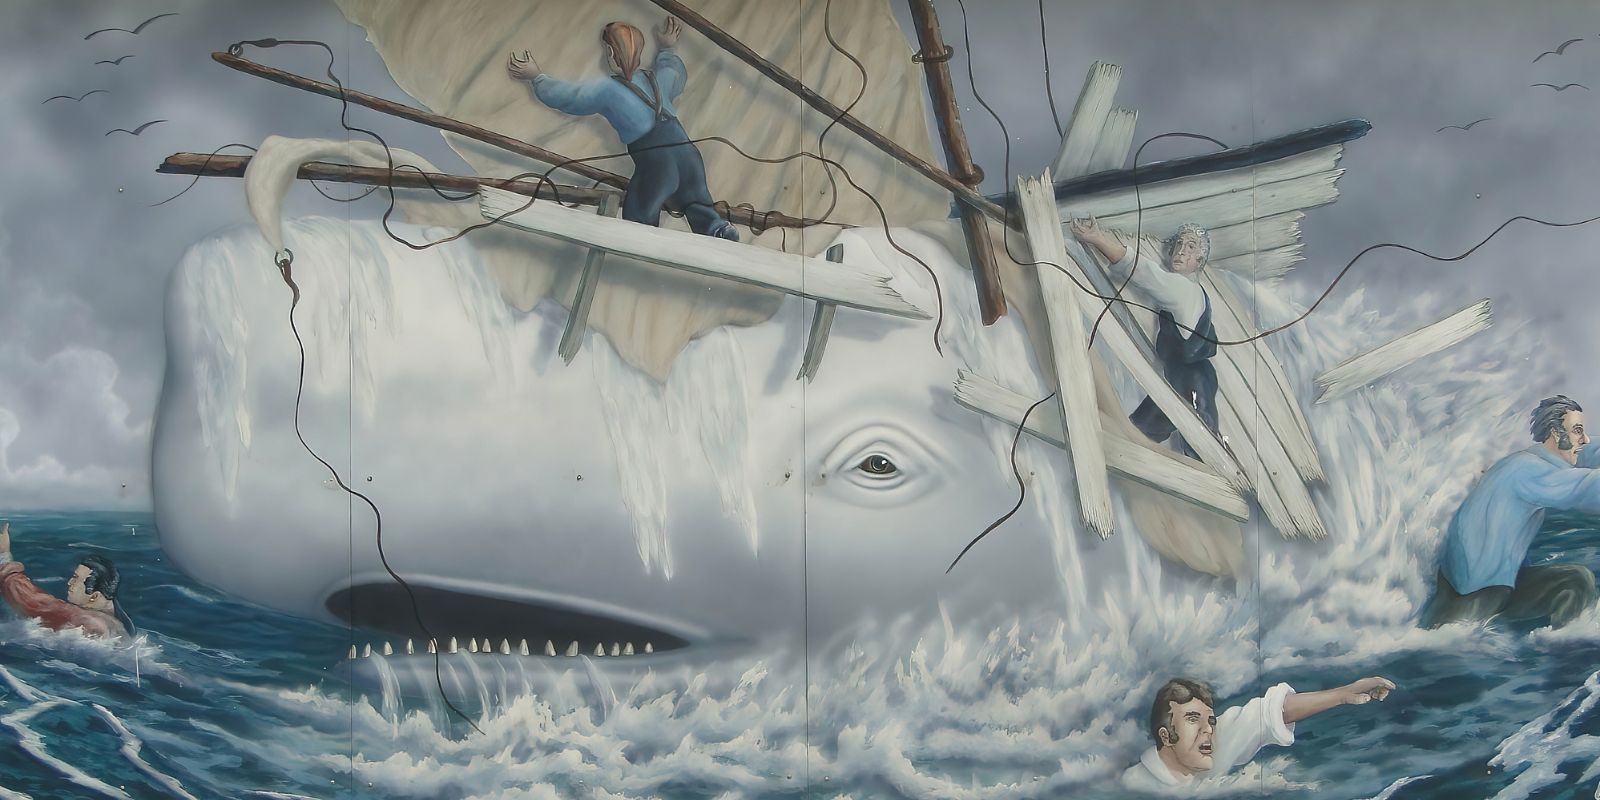 November 14th: Literary Classic, Moby Dick Published